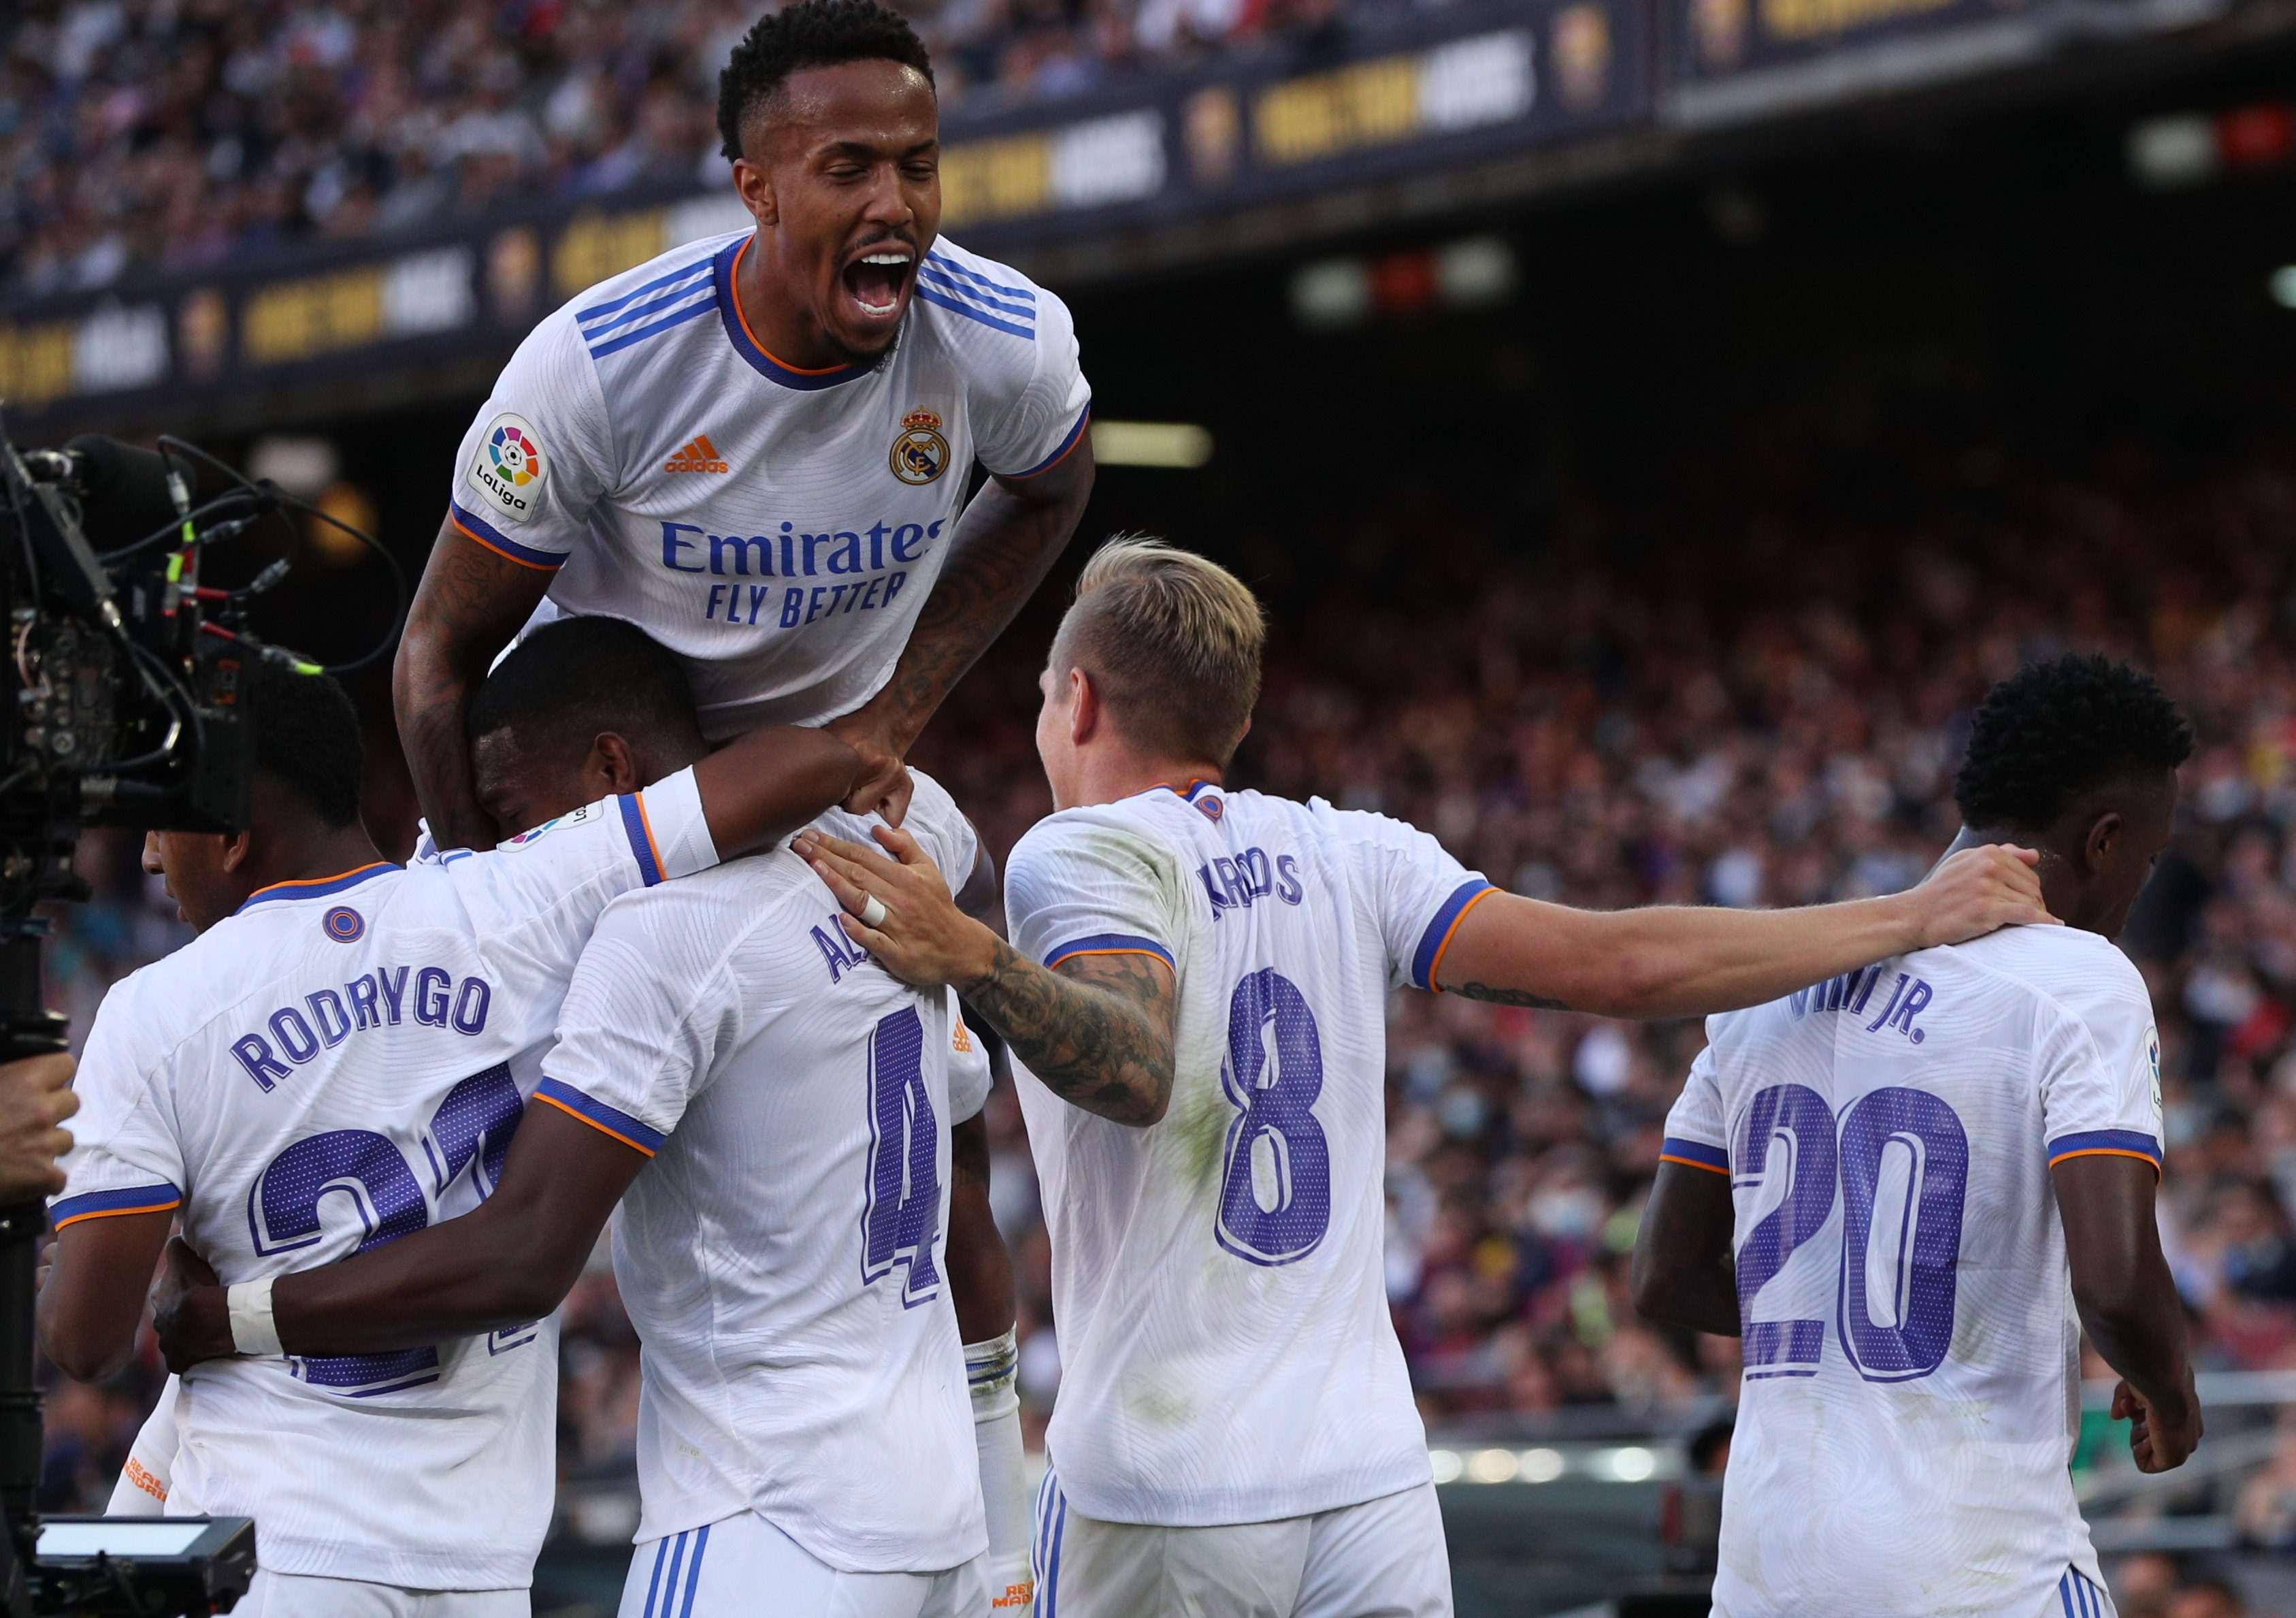 Alaba strike on Clasico debut gives Real Madrid 2-1 win at Barcelona